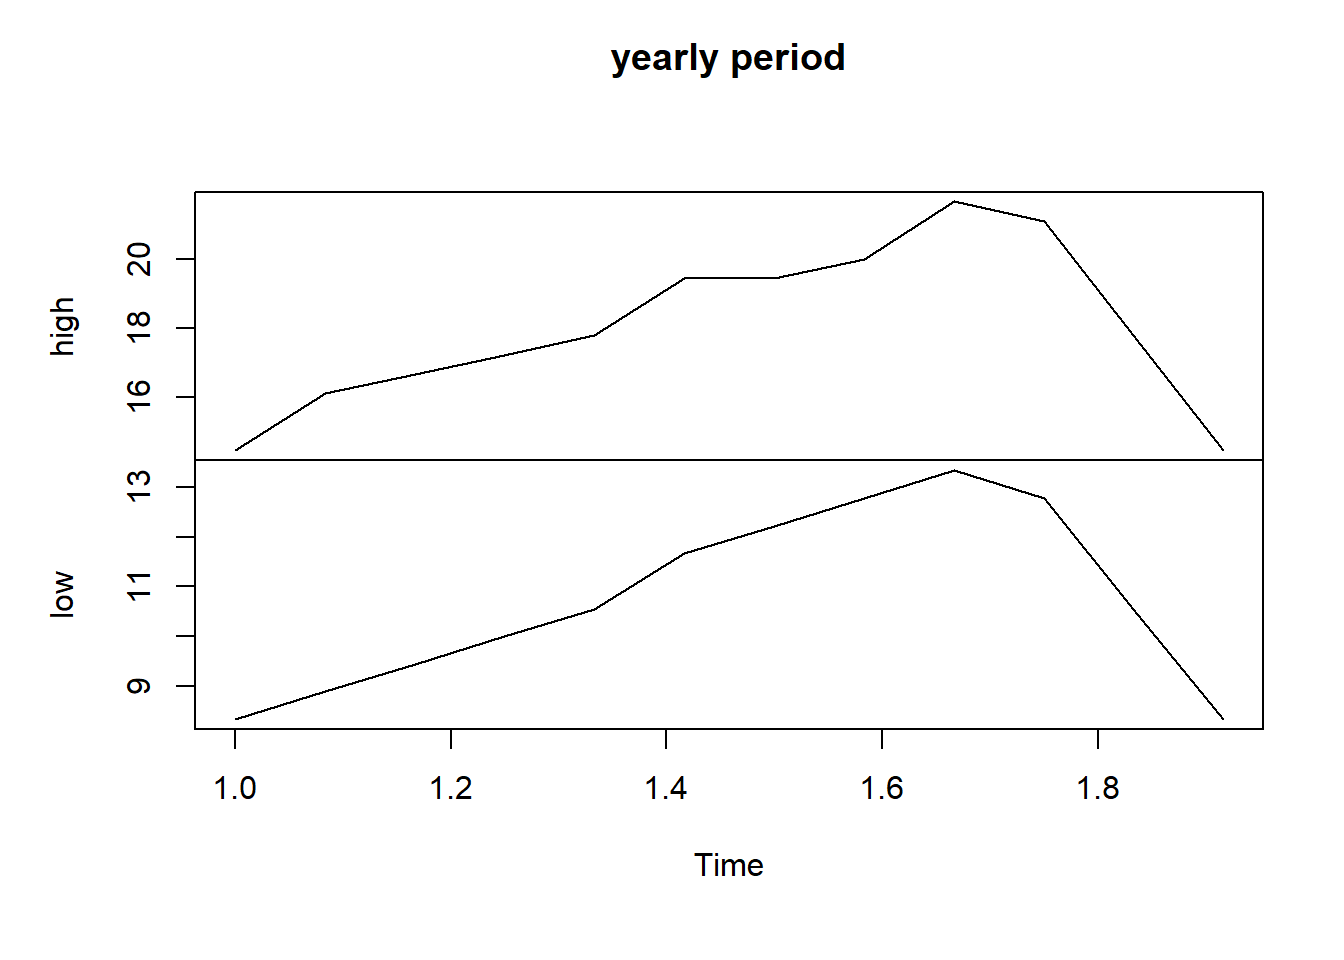 SF data with yearly period